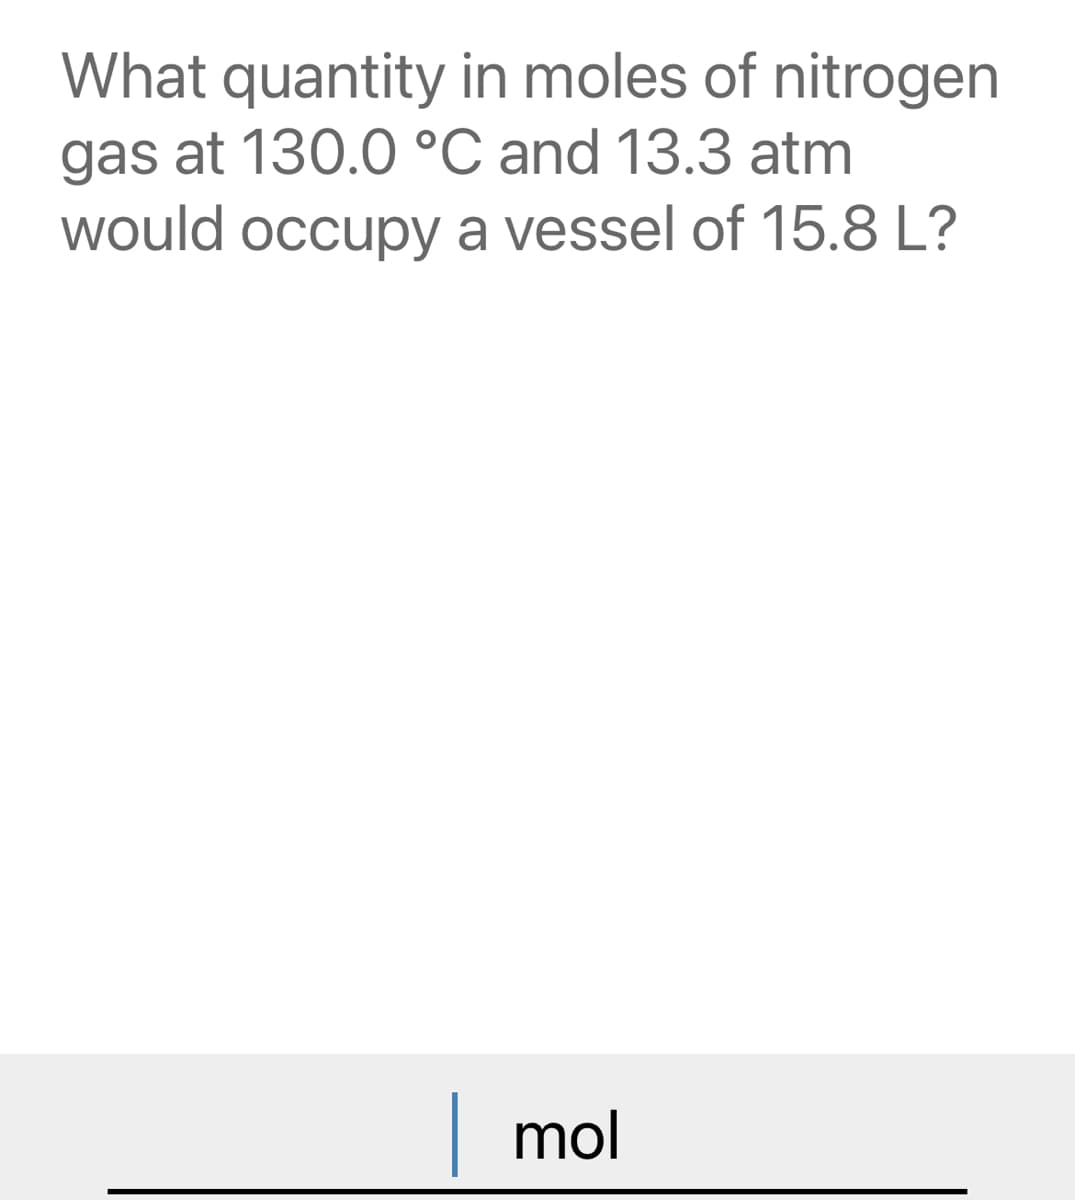 What quantity in moles of nitrogen
gas at 130.0 °C and 13.3 atm
would occupy a vessel of 15.8 L?
| mol
